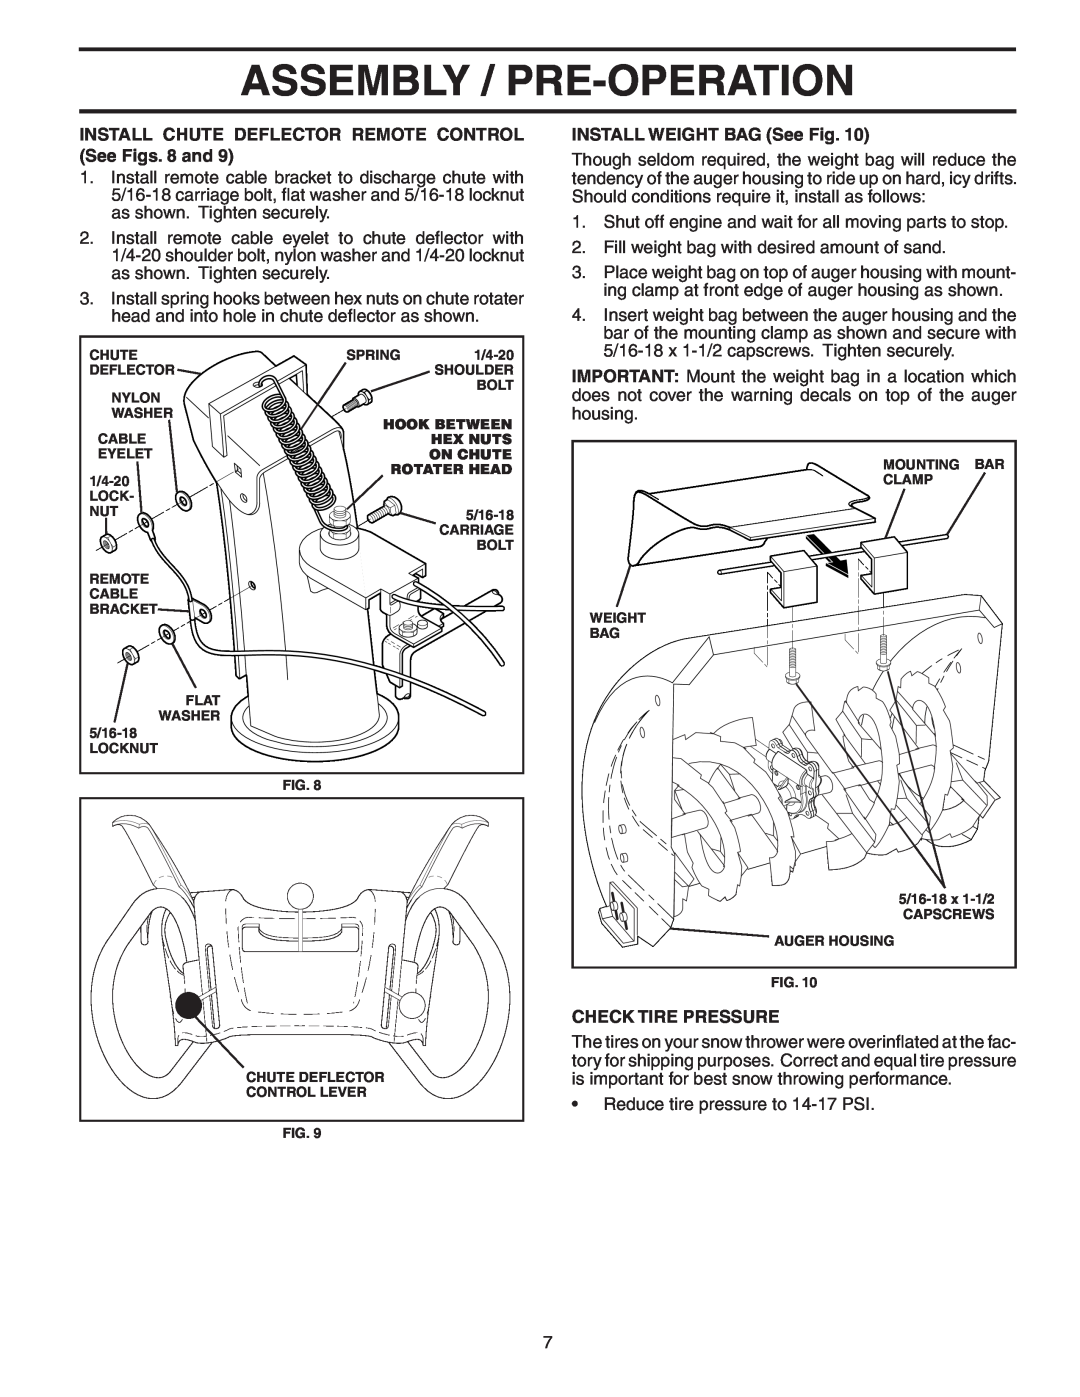 Poulan 183615 owner manual Assembly / Pre-Operation, INSTALL WEIGHT BAG See Fig, Check Tire Pressure 